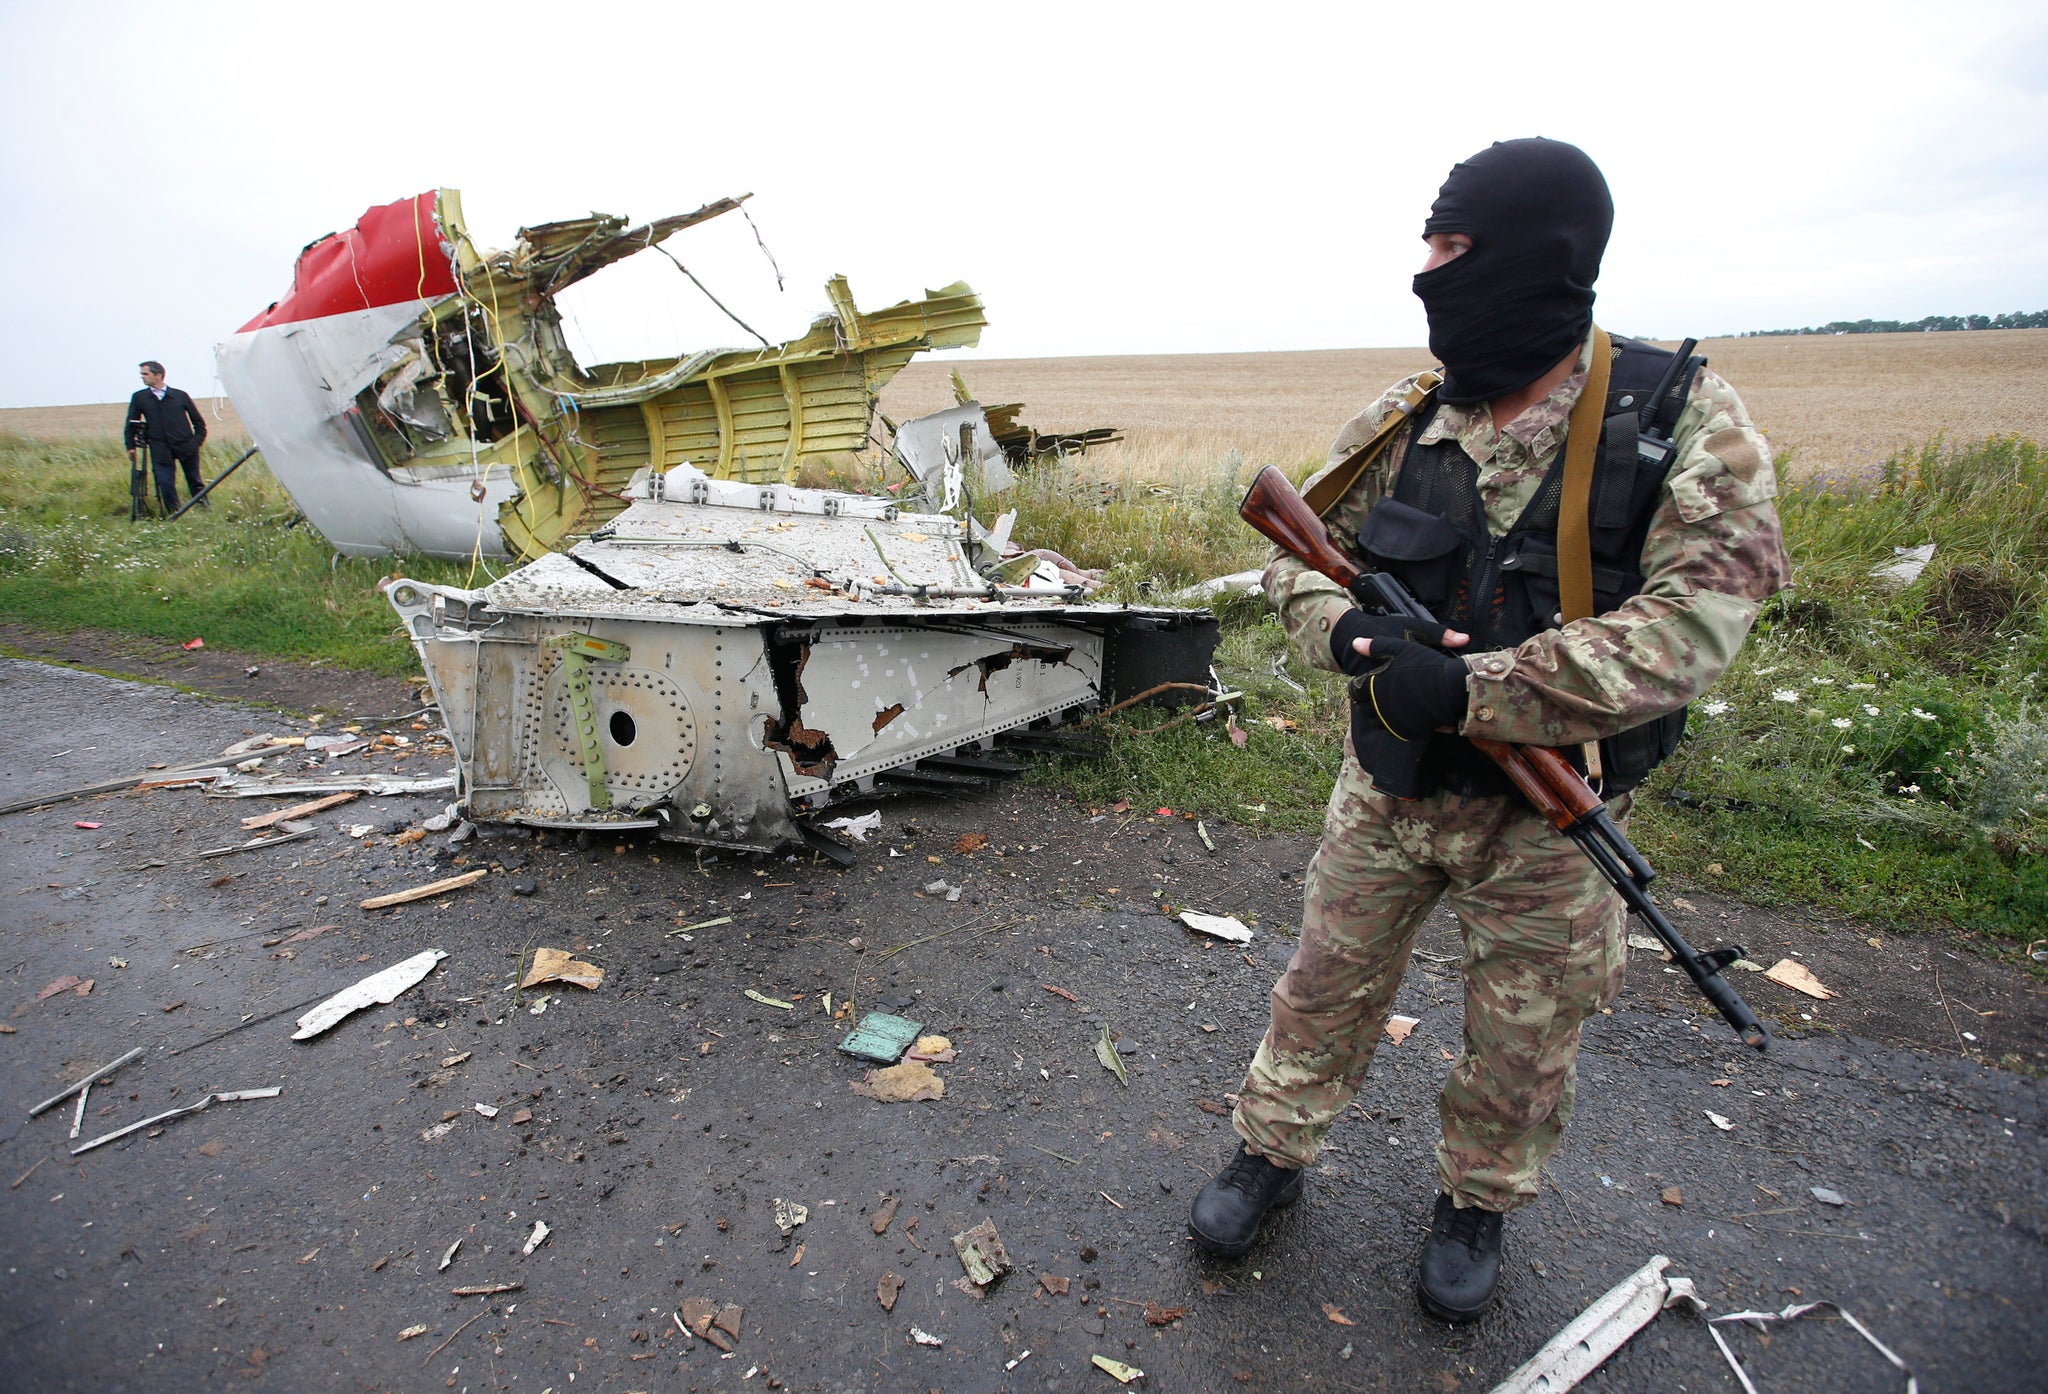 Pro-Russian separatists claim that the Ukrainian army is attempting to break through Donetsk's city limits